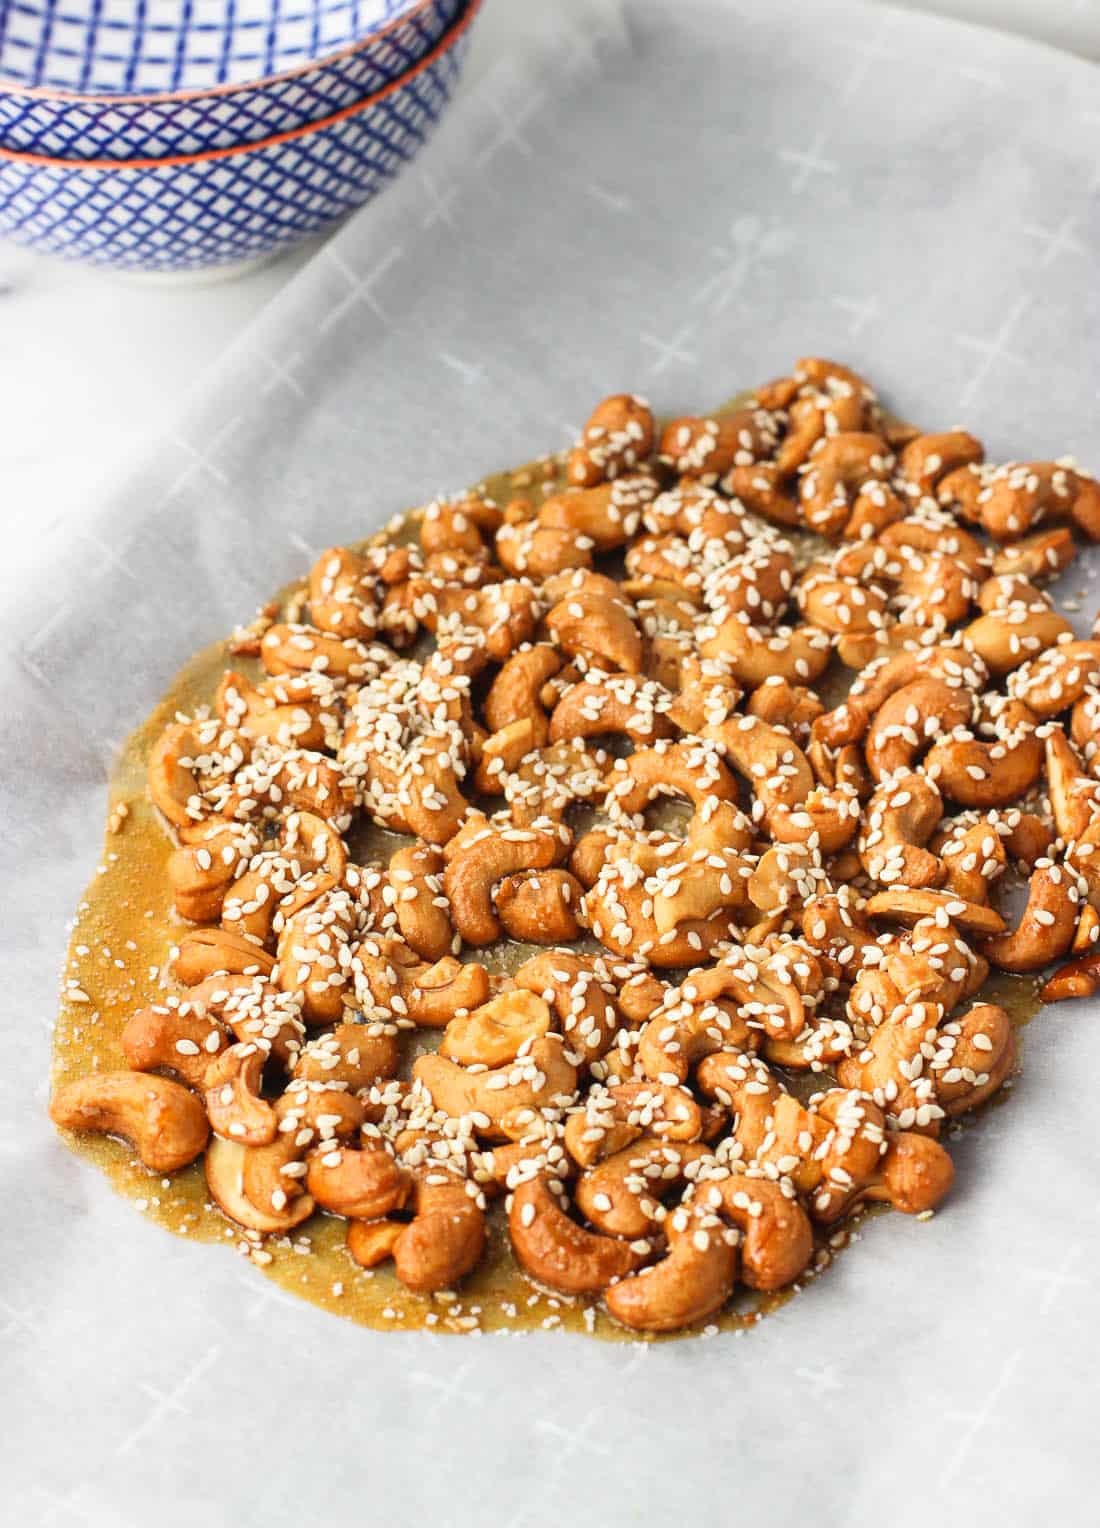 Cashews covered in a honey mixture on a parchment-lined sheet pan, topped with sesame seeds before breaking apart into clusters